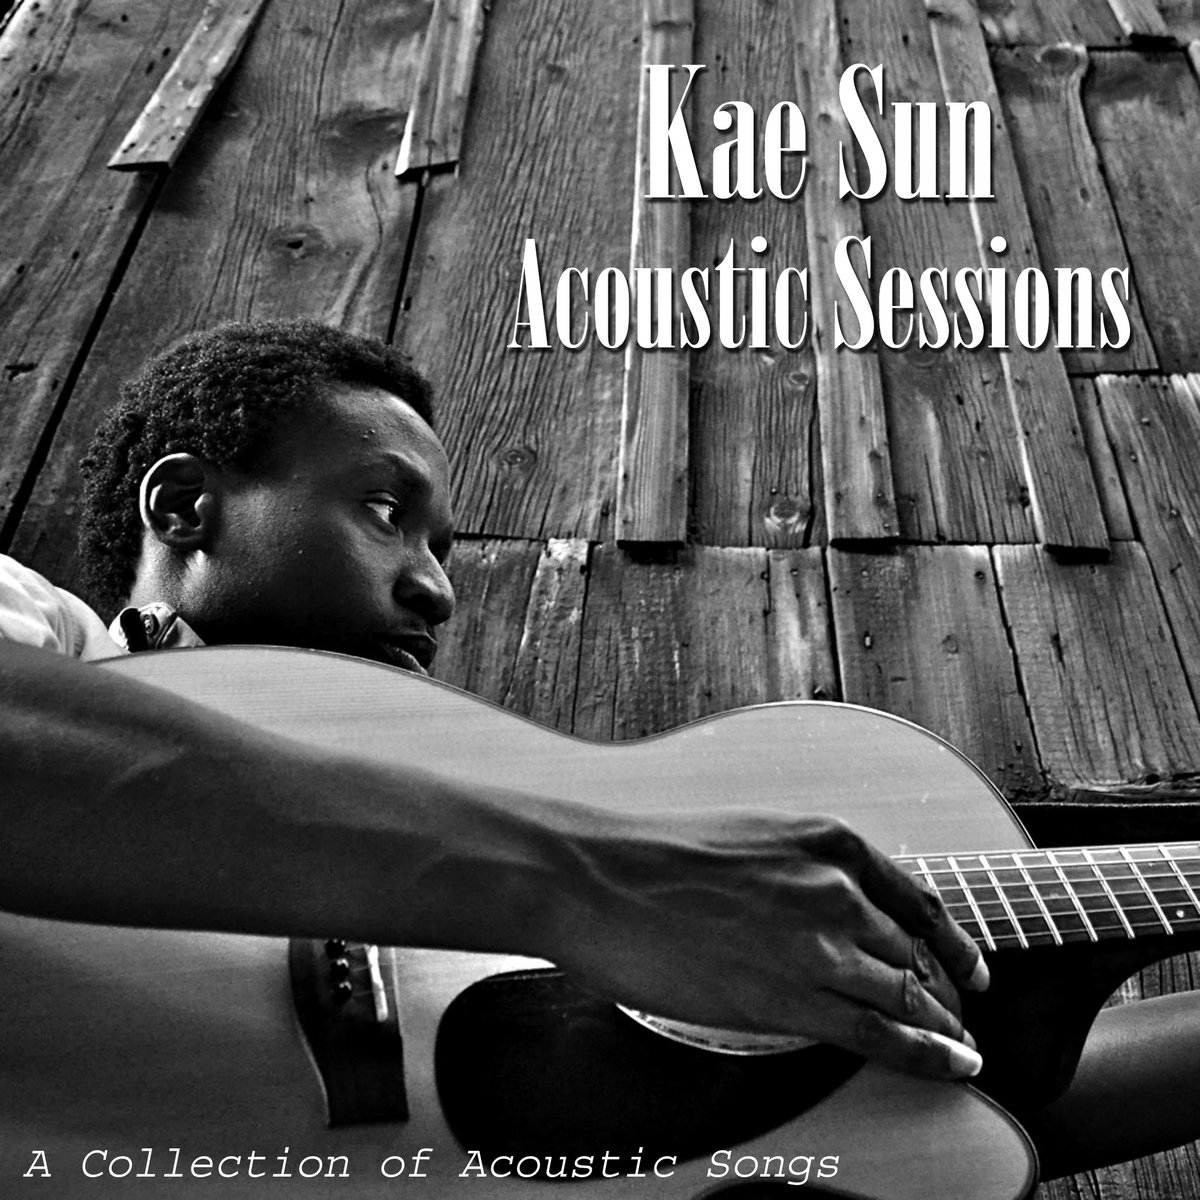 Acoustic Sessions by Kae Sun